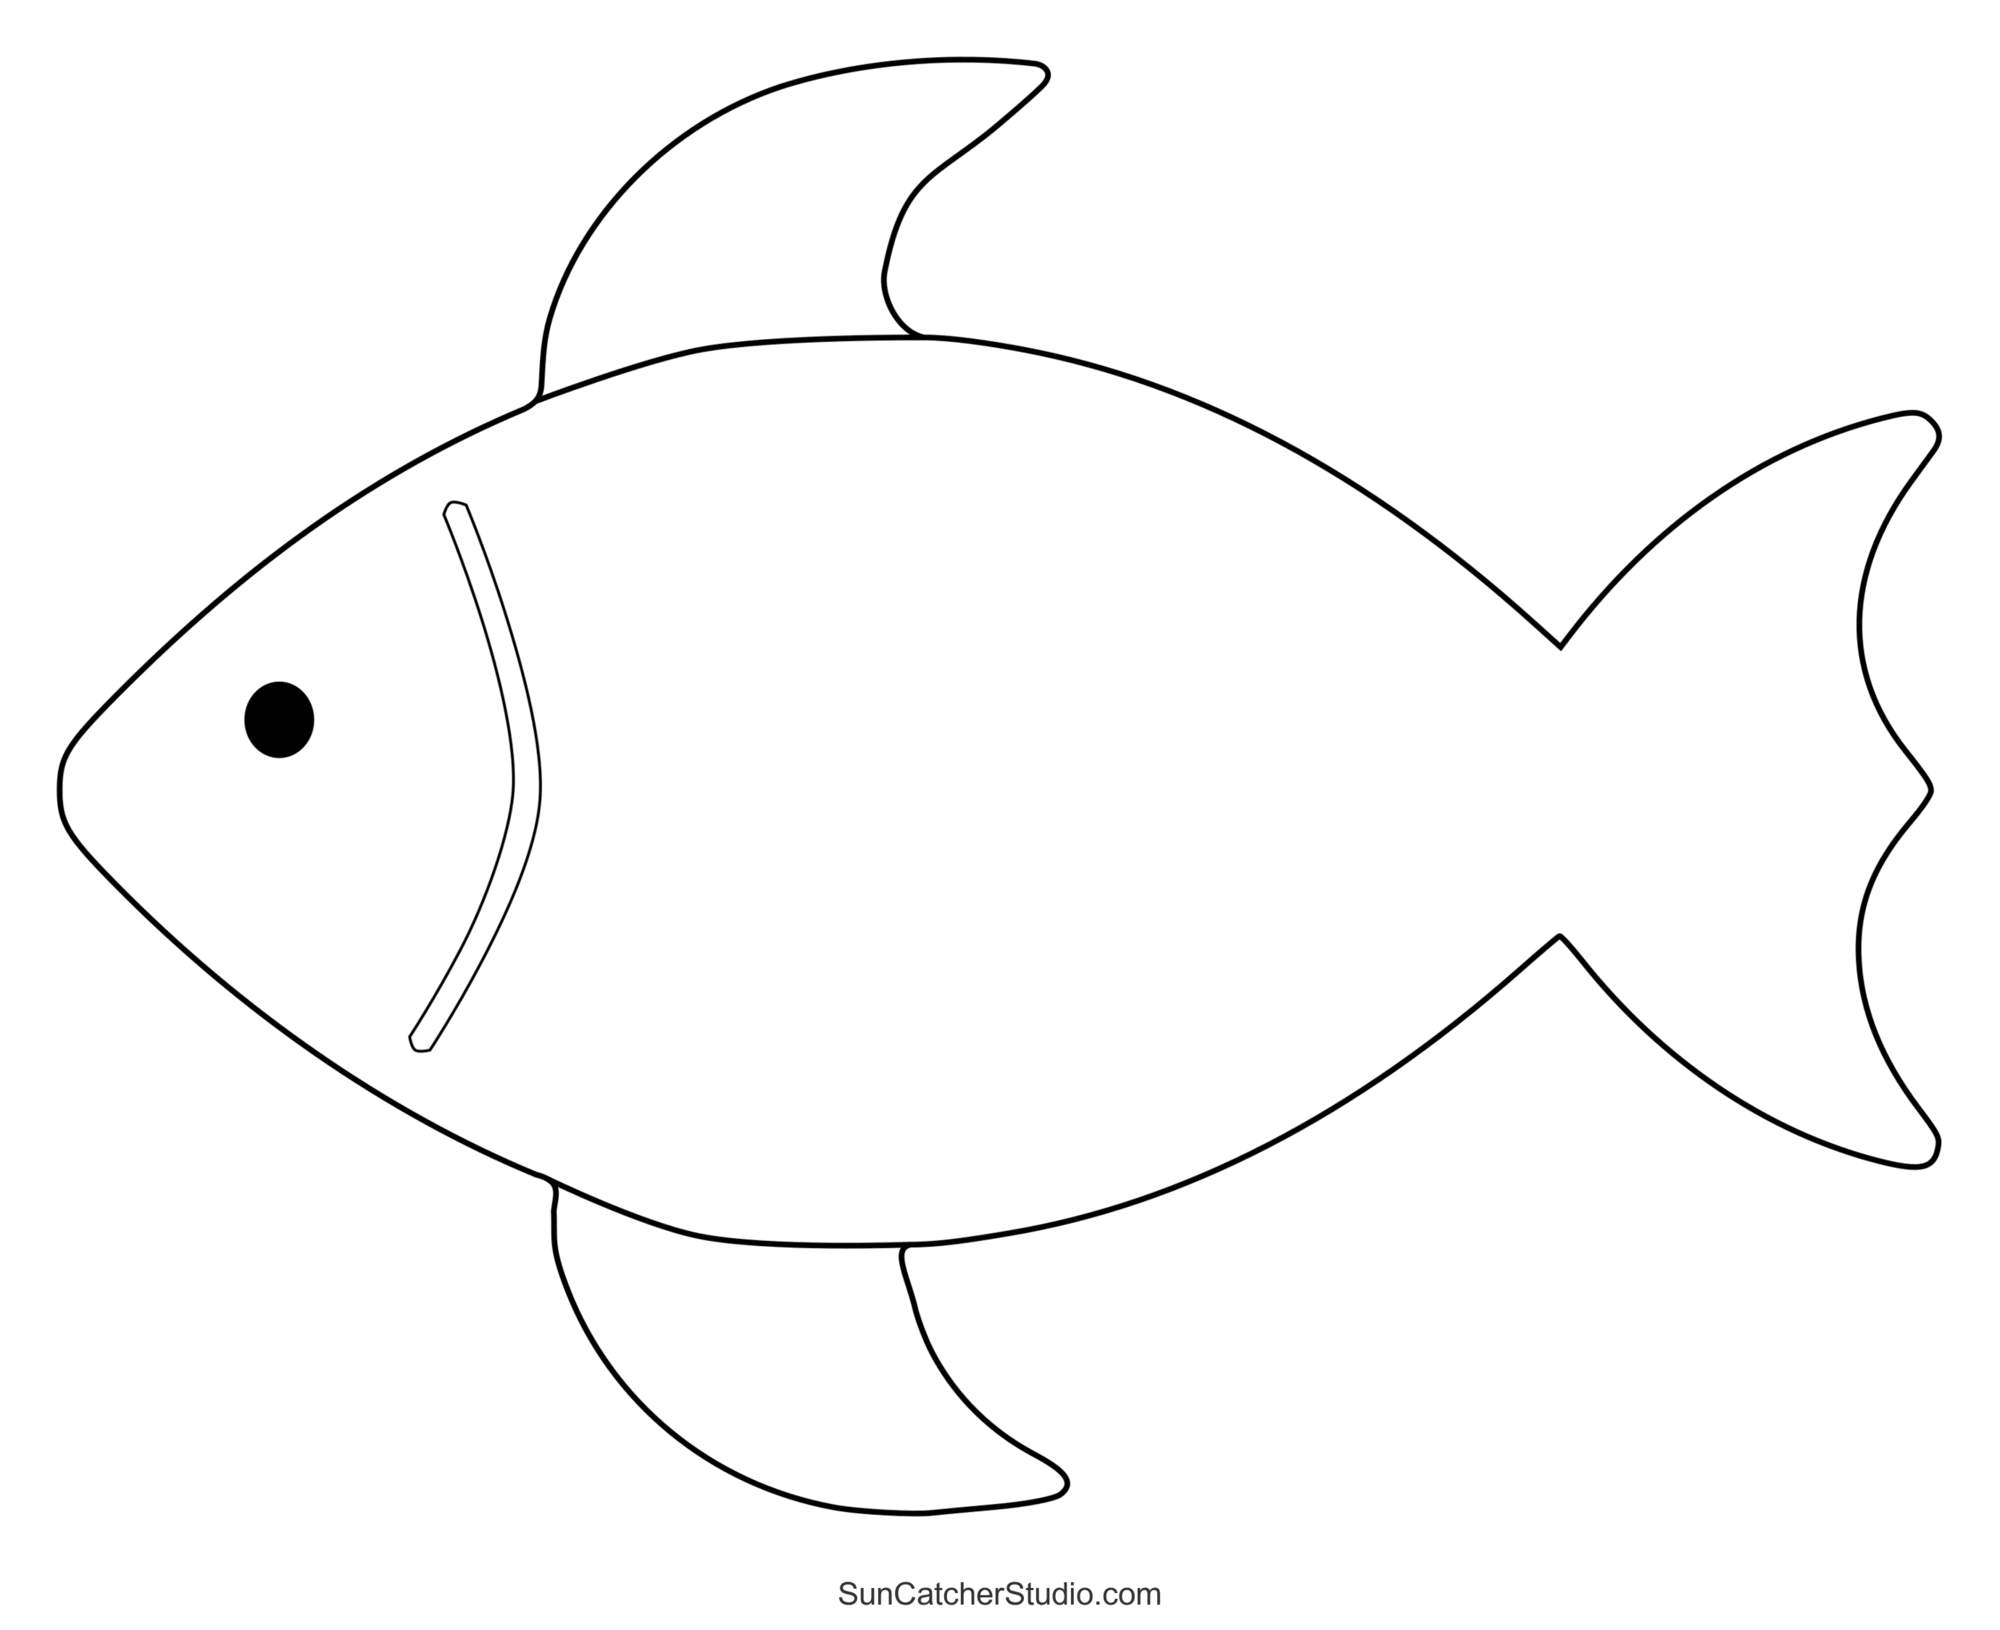 Fish Patterns And Marine Templates (Printable Stencils) – Diy throughout Free Printable Fish Stencils